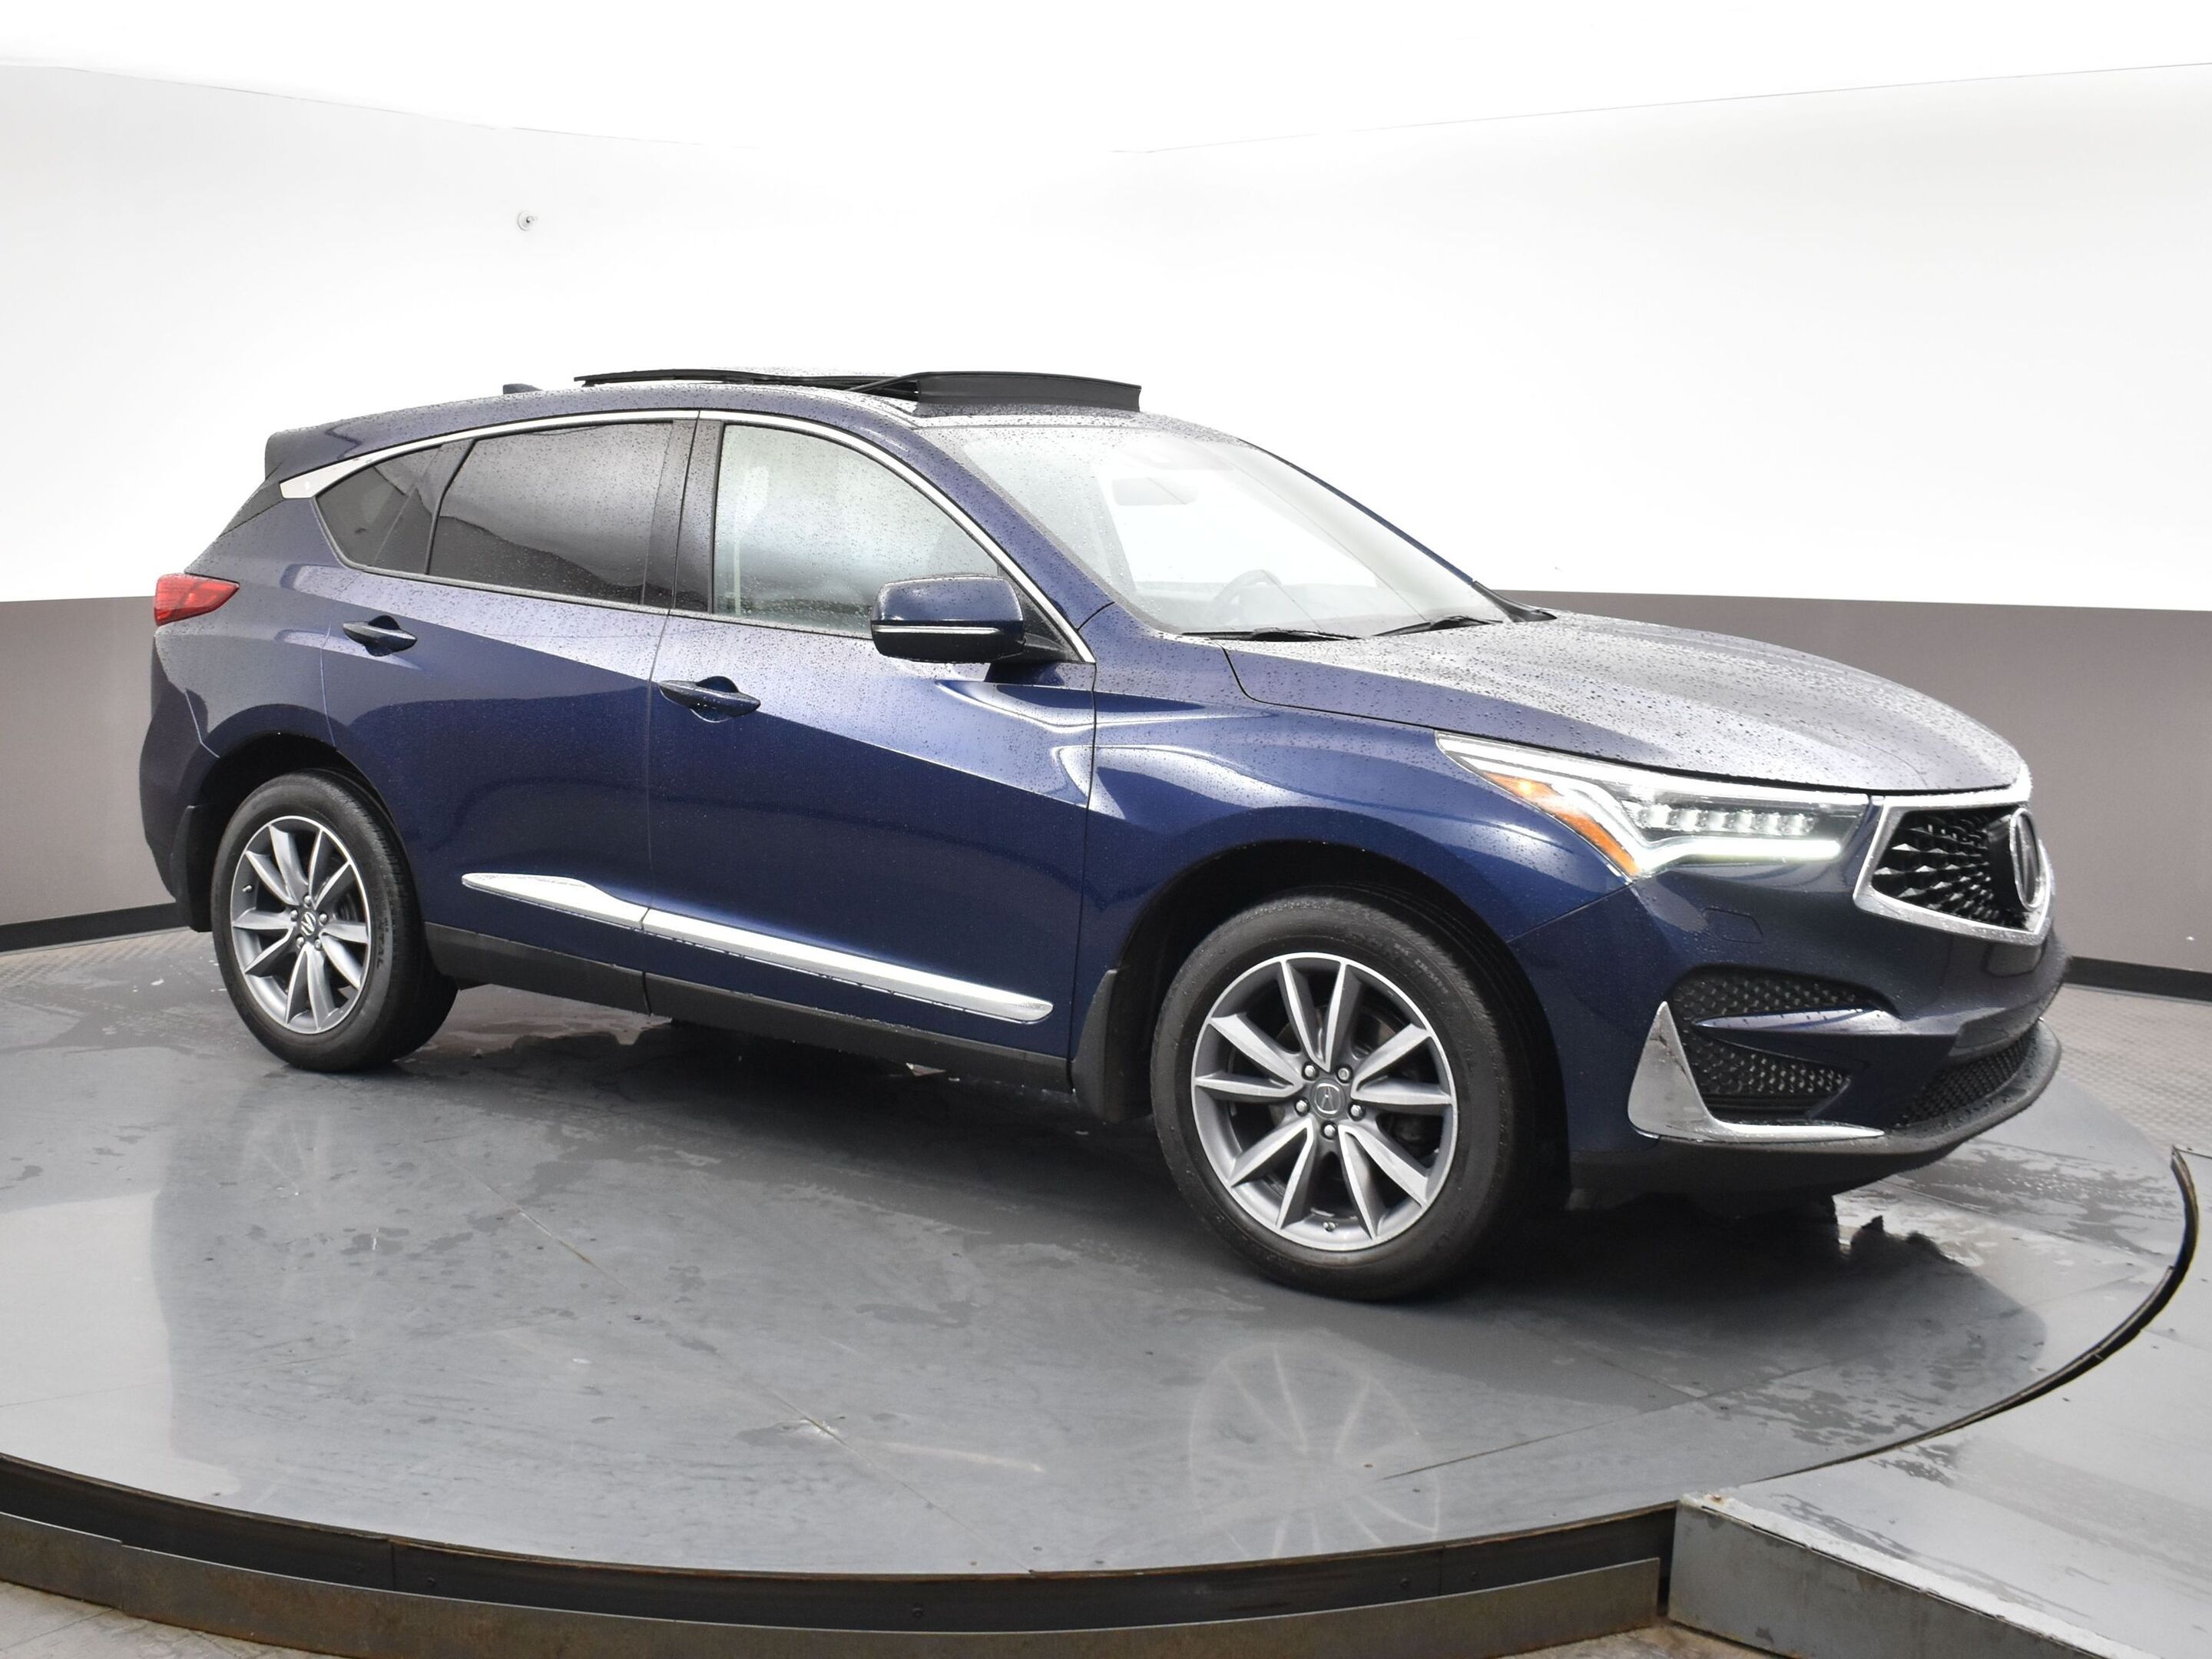 2019 Acura RDX ELITE SH-AWD - Call 902-469-8484 To Book Appointme